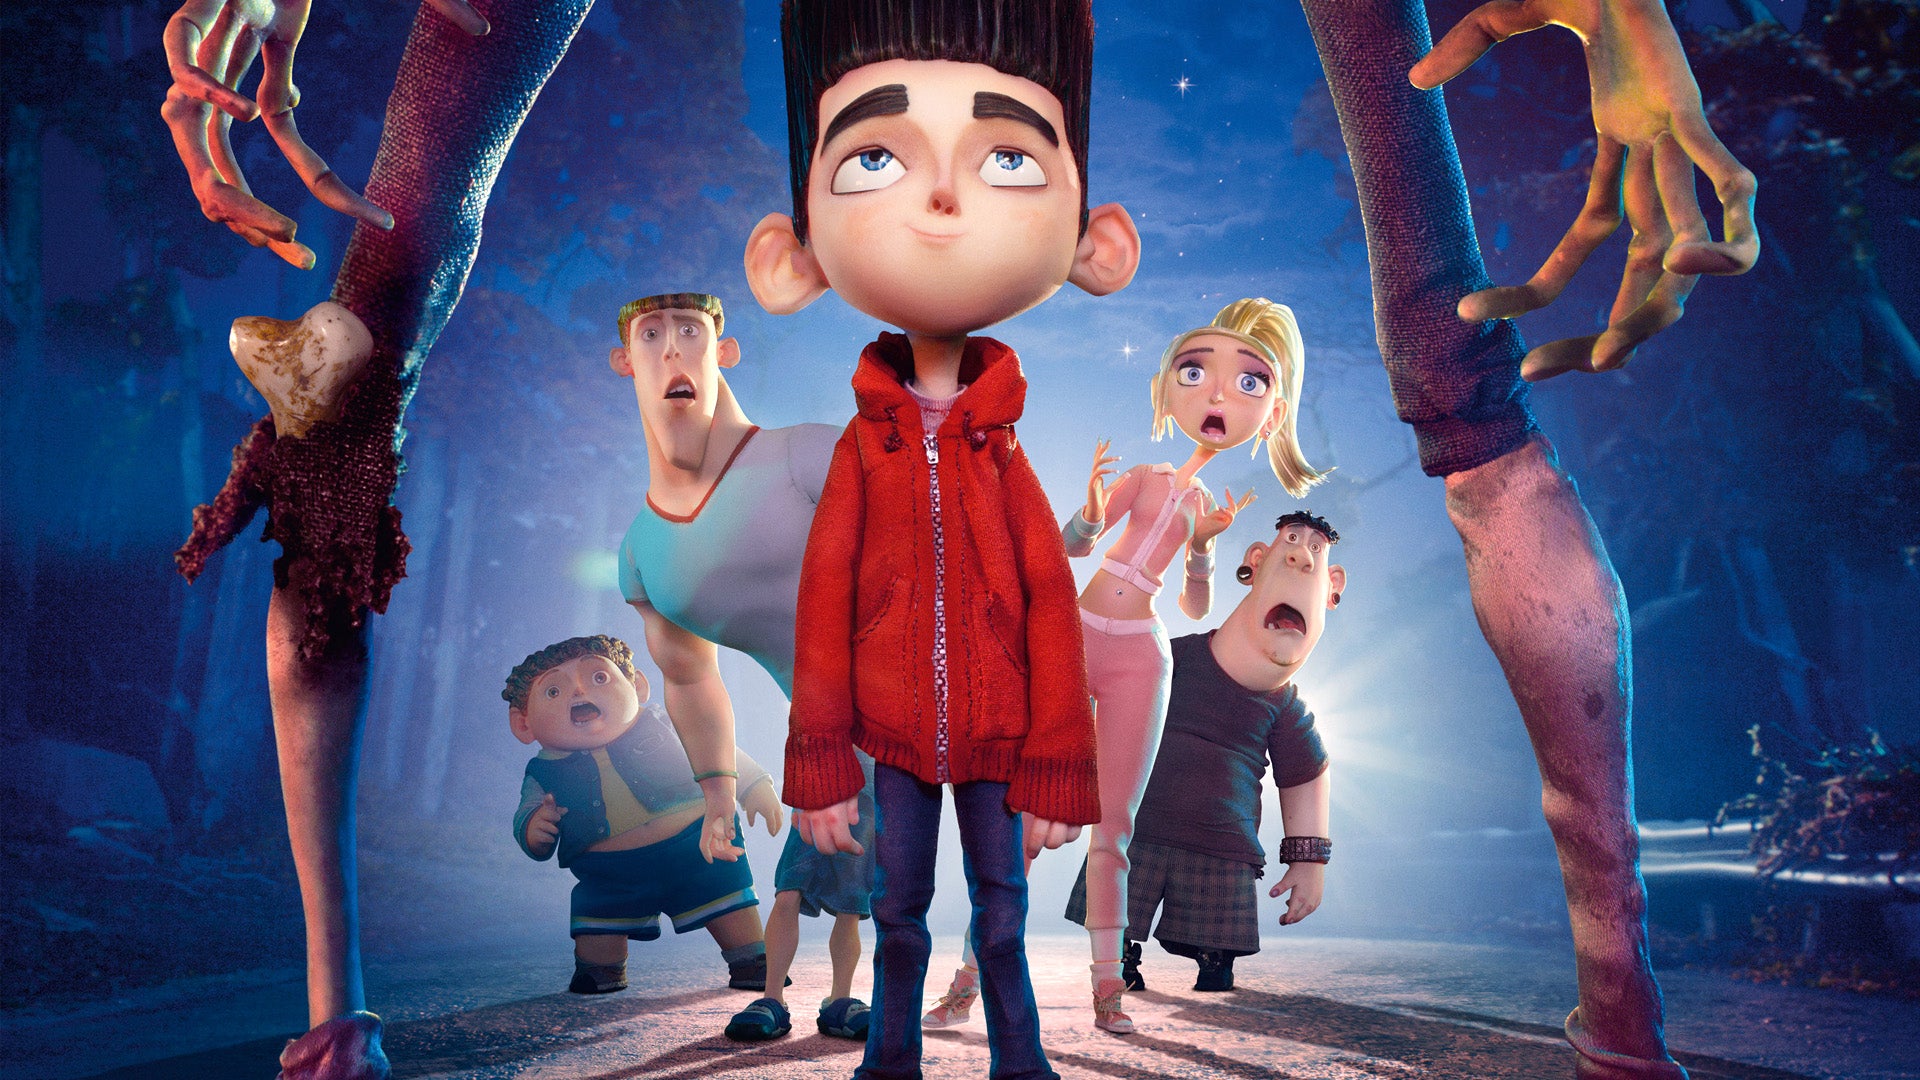 ParaNorman / Coraline Double Feature